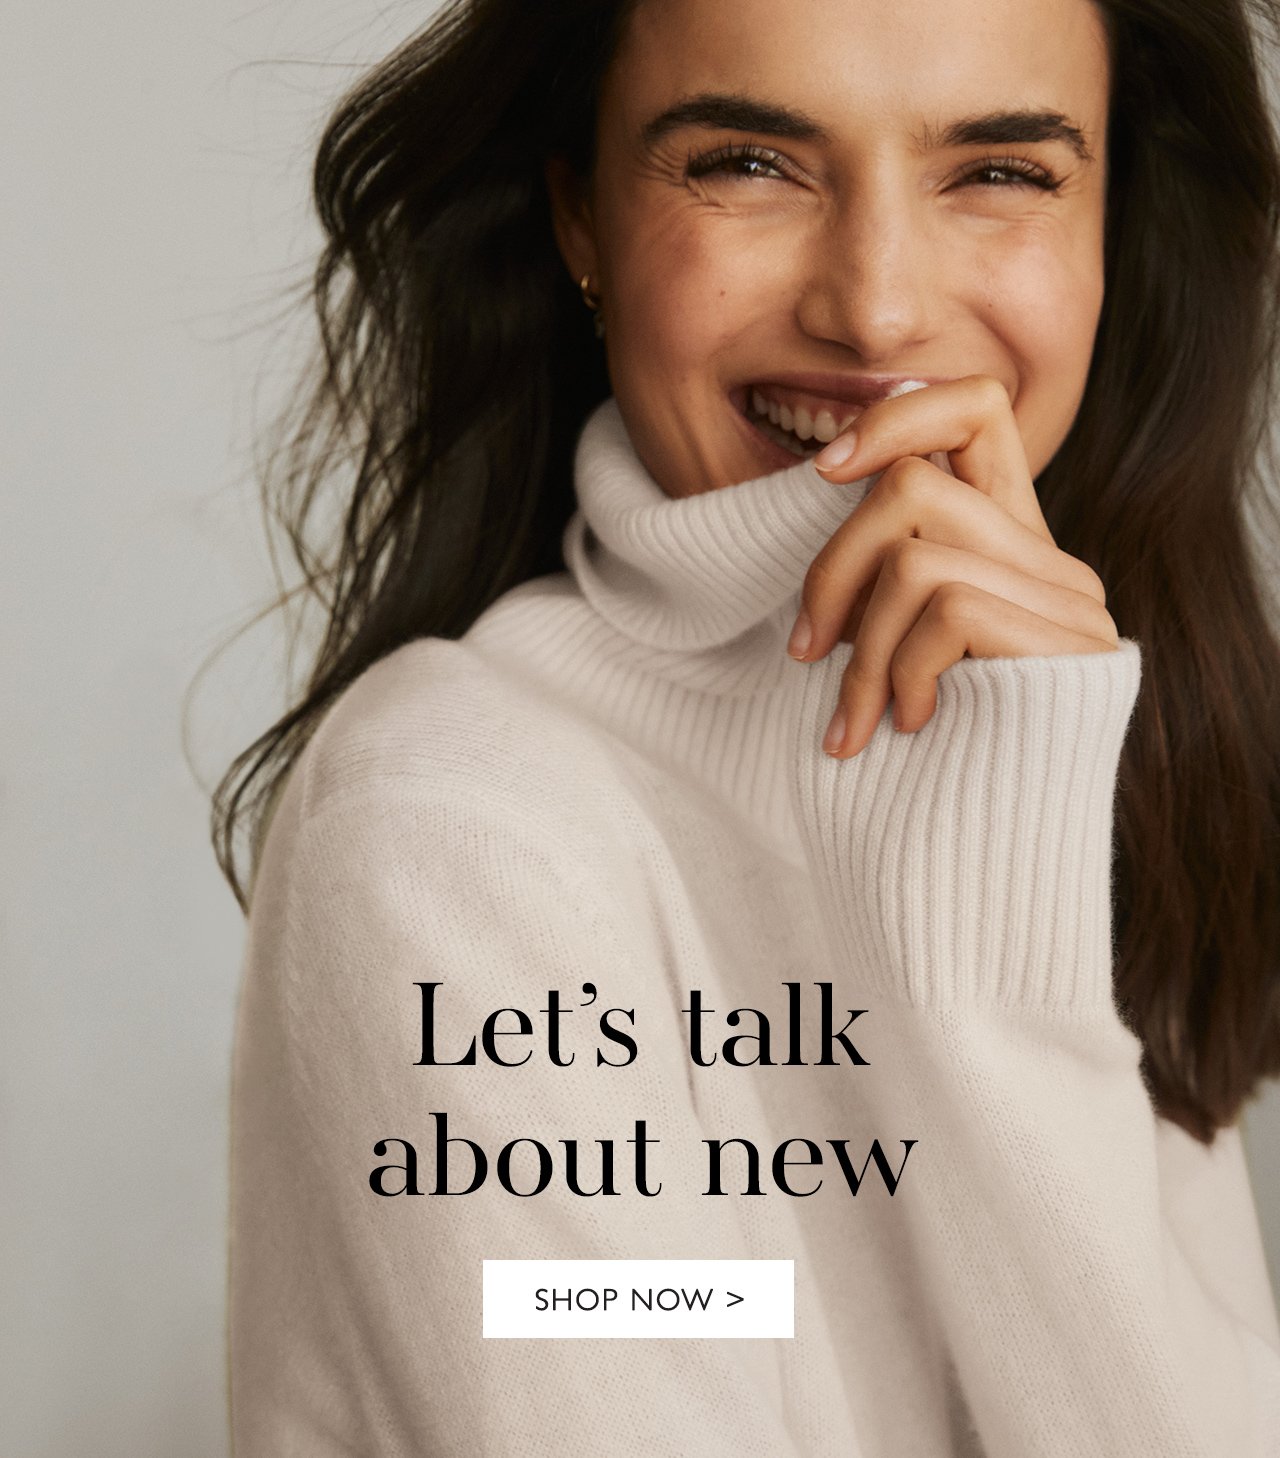 Let's talk about new | SHOP NEW IN CLOTHING